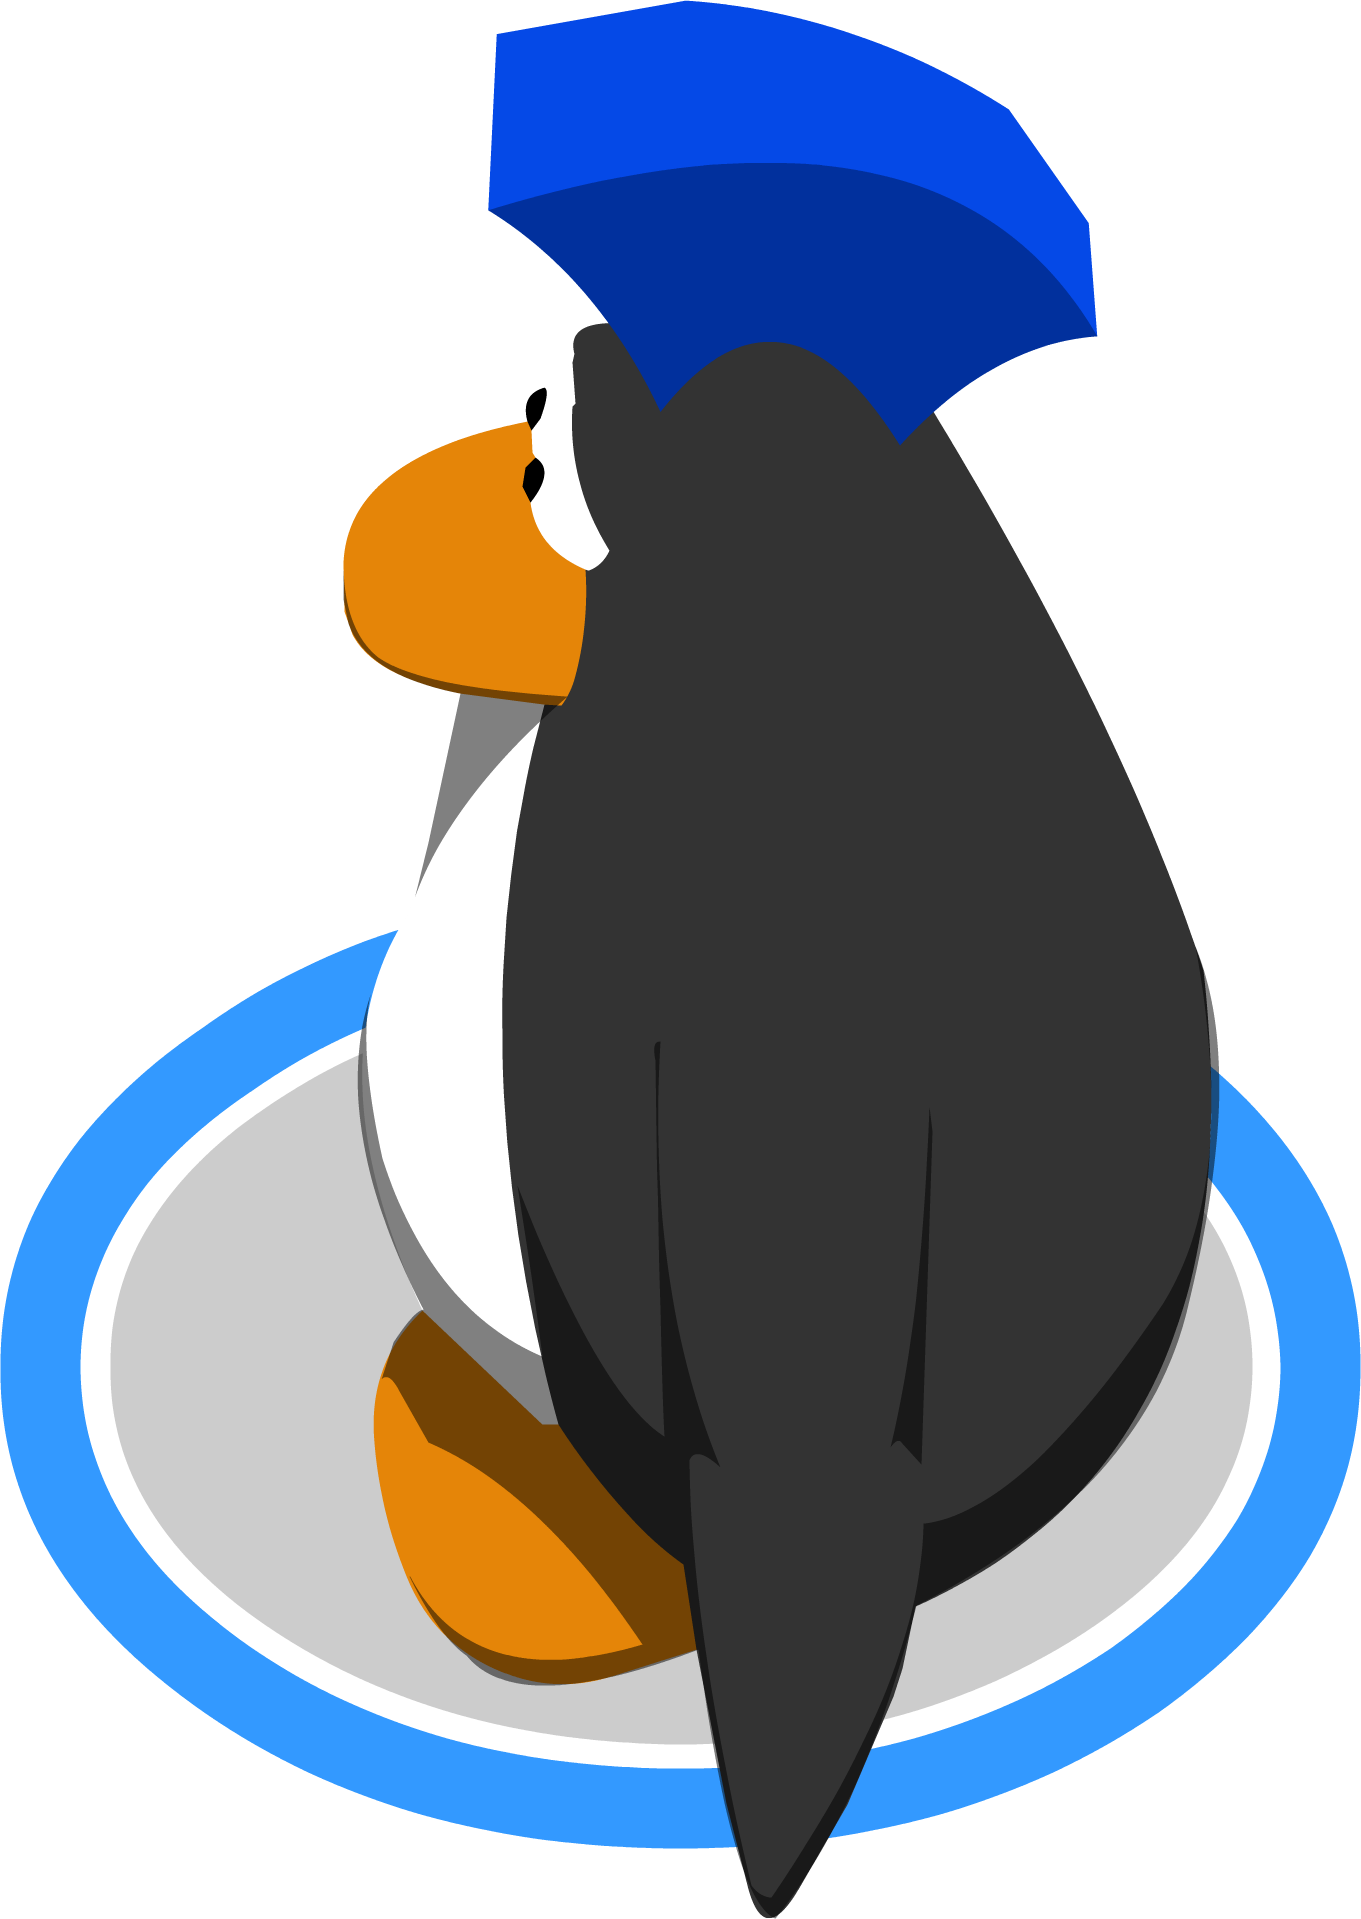 A Cartoon Penguin With A Blue Hat